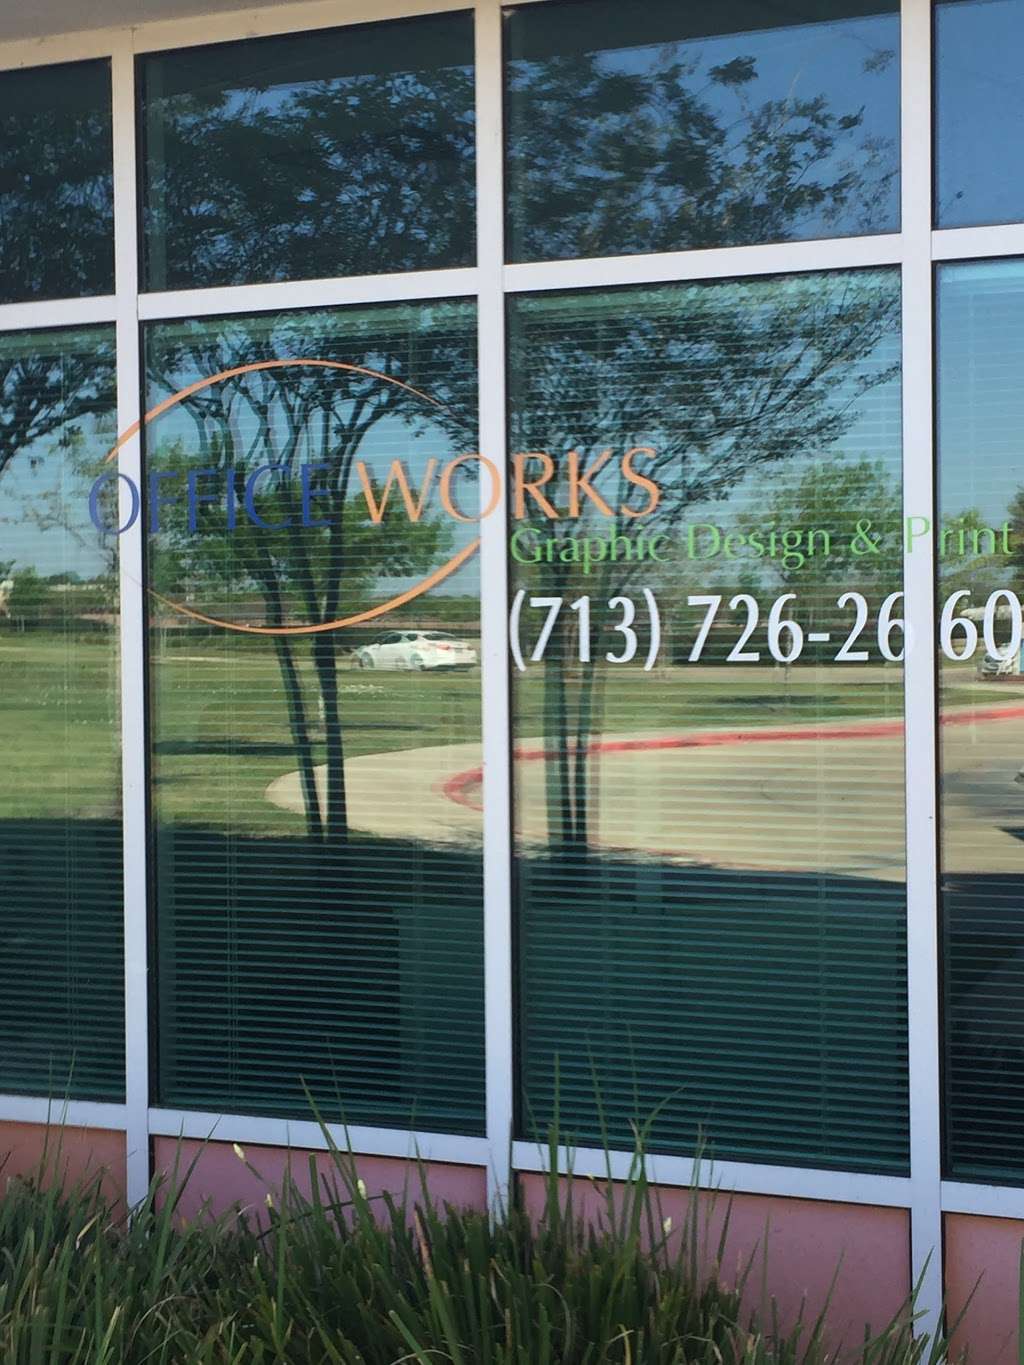 Office Works Graphic Design and Print | 6011 W Orem Dr, Houston, TX 77085 | Phone: (713) 726-2660